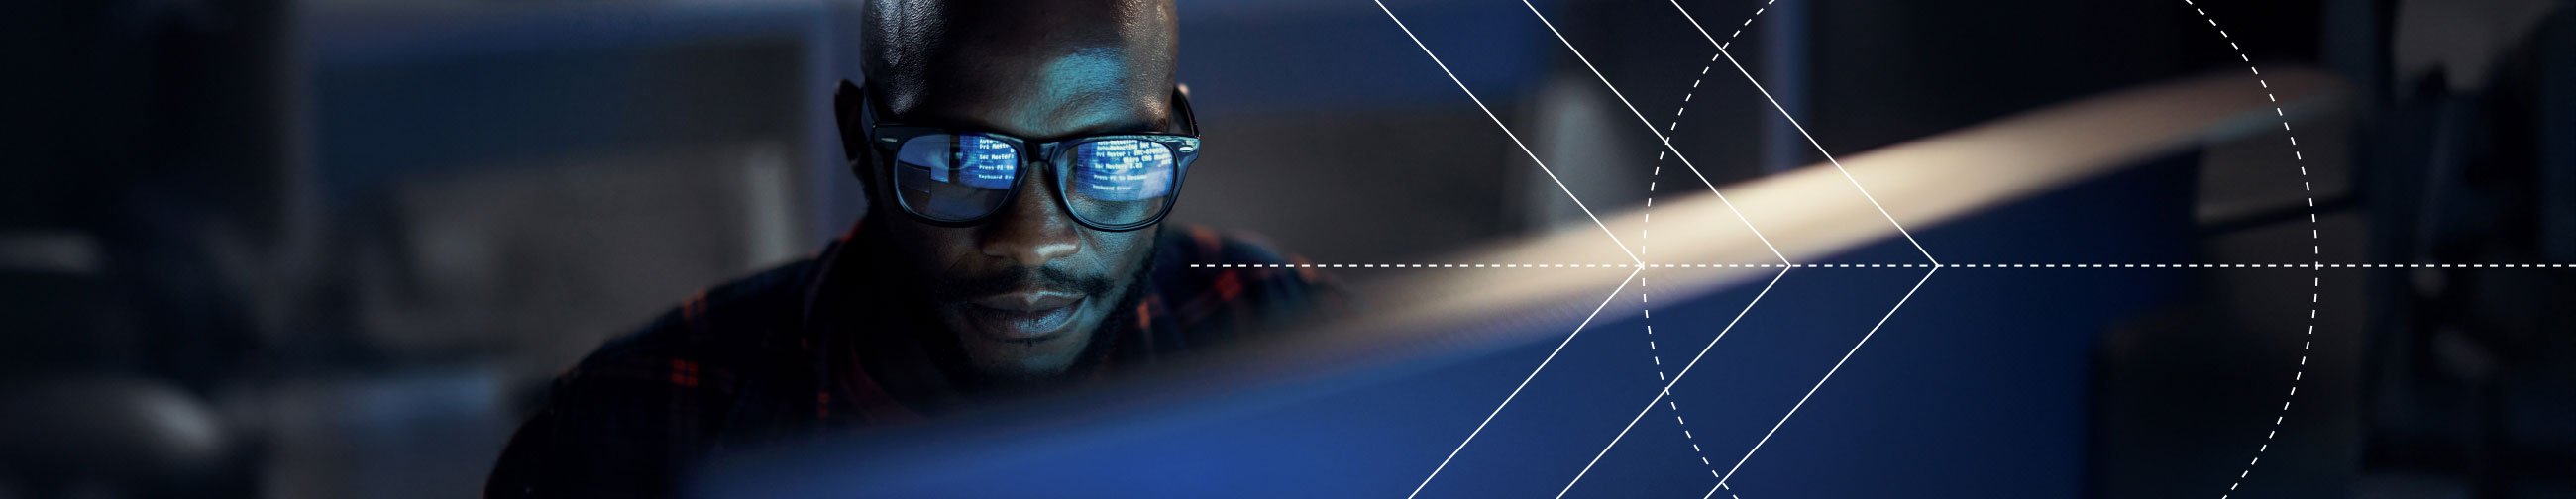  Portrait of a man with computer readings reflected in his glasses.